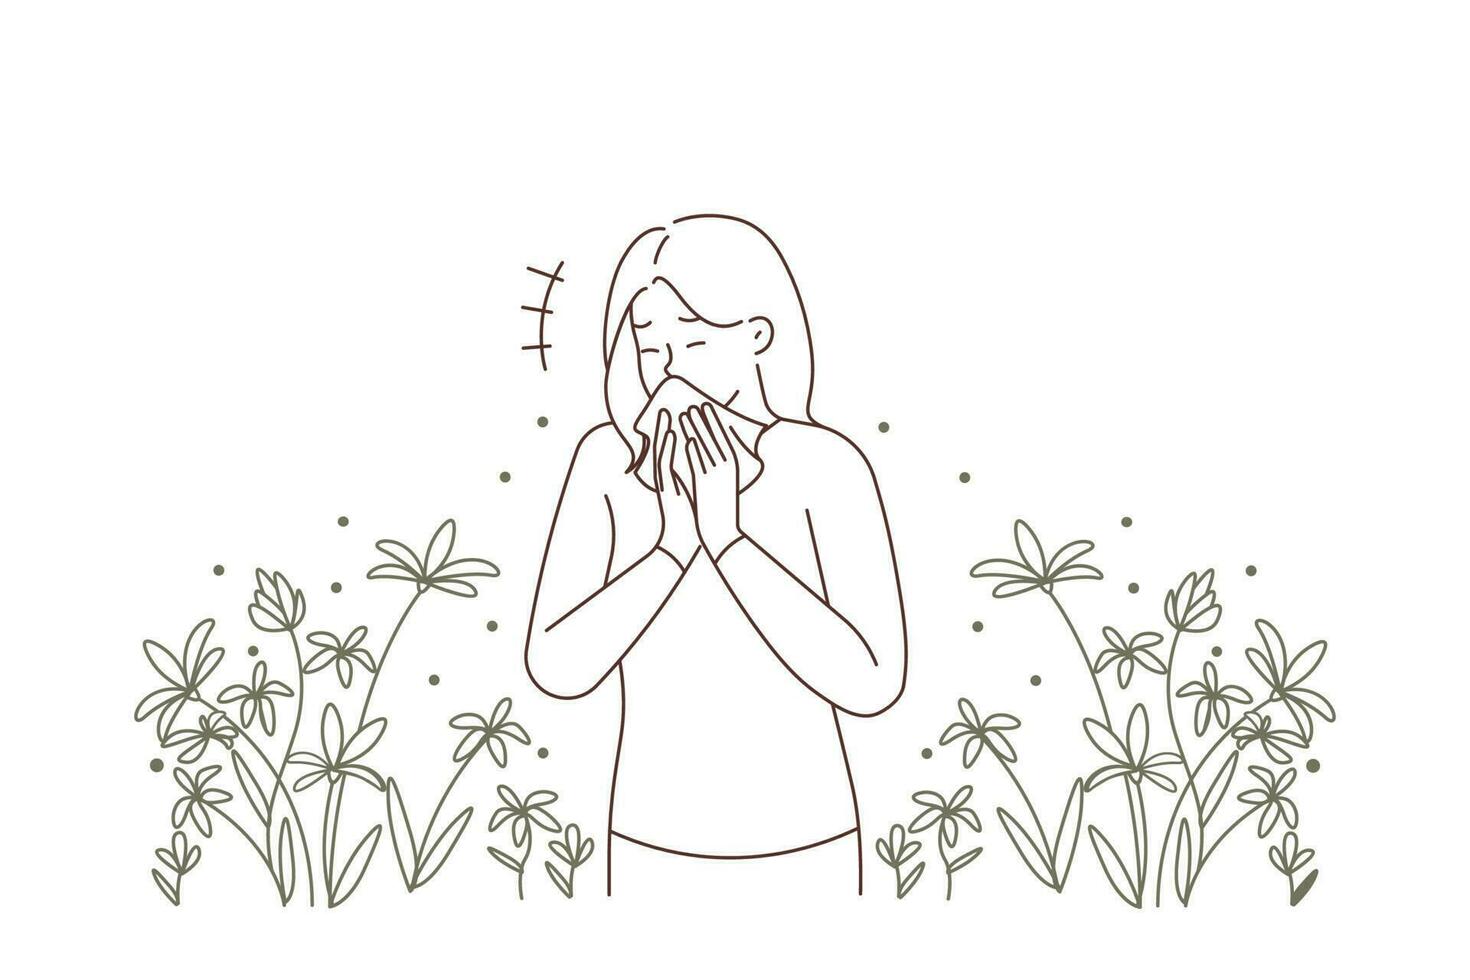 Unhealthy young woman standing in field sneezing suffering from seasonal allergy. Unwell sick girl struggle with allergic reaction during summer season. Vector illustration.